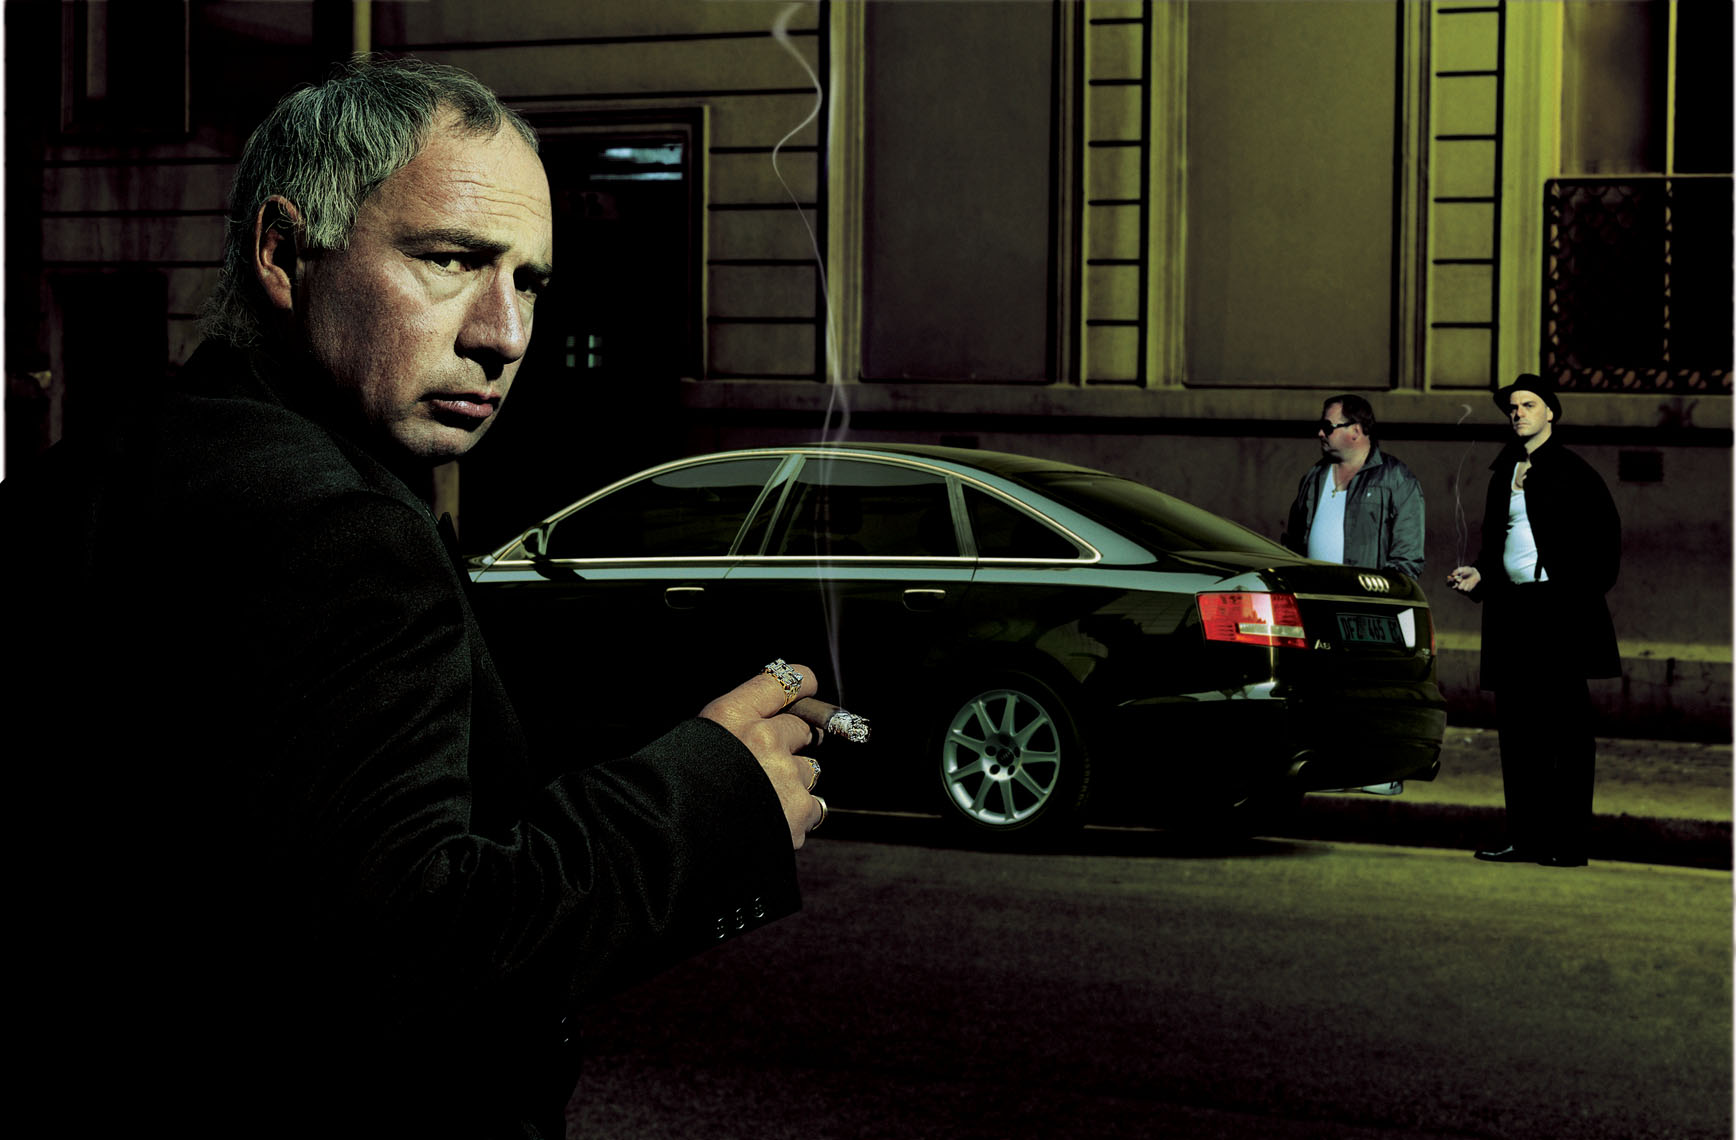 A mafia boss smoking his cigar across the road from where a black Audi A6 is parked. 